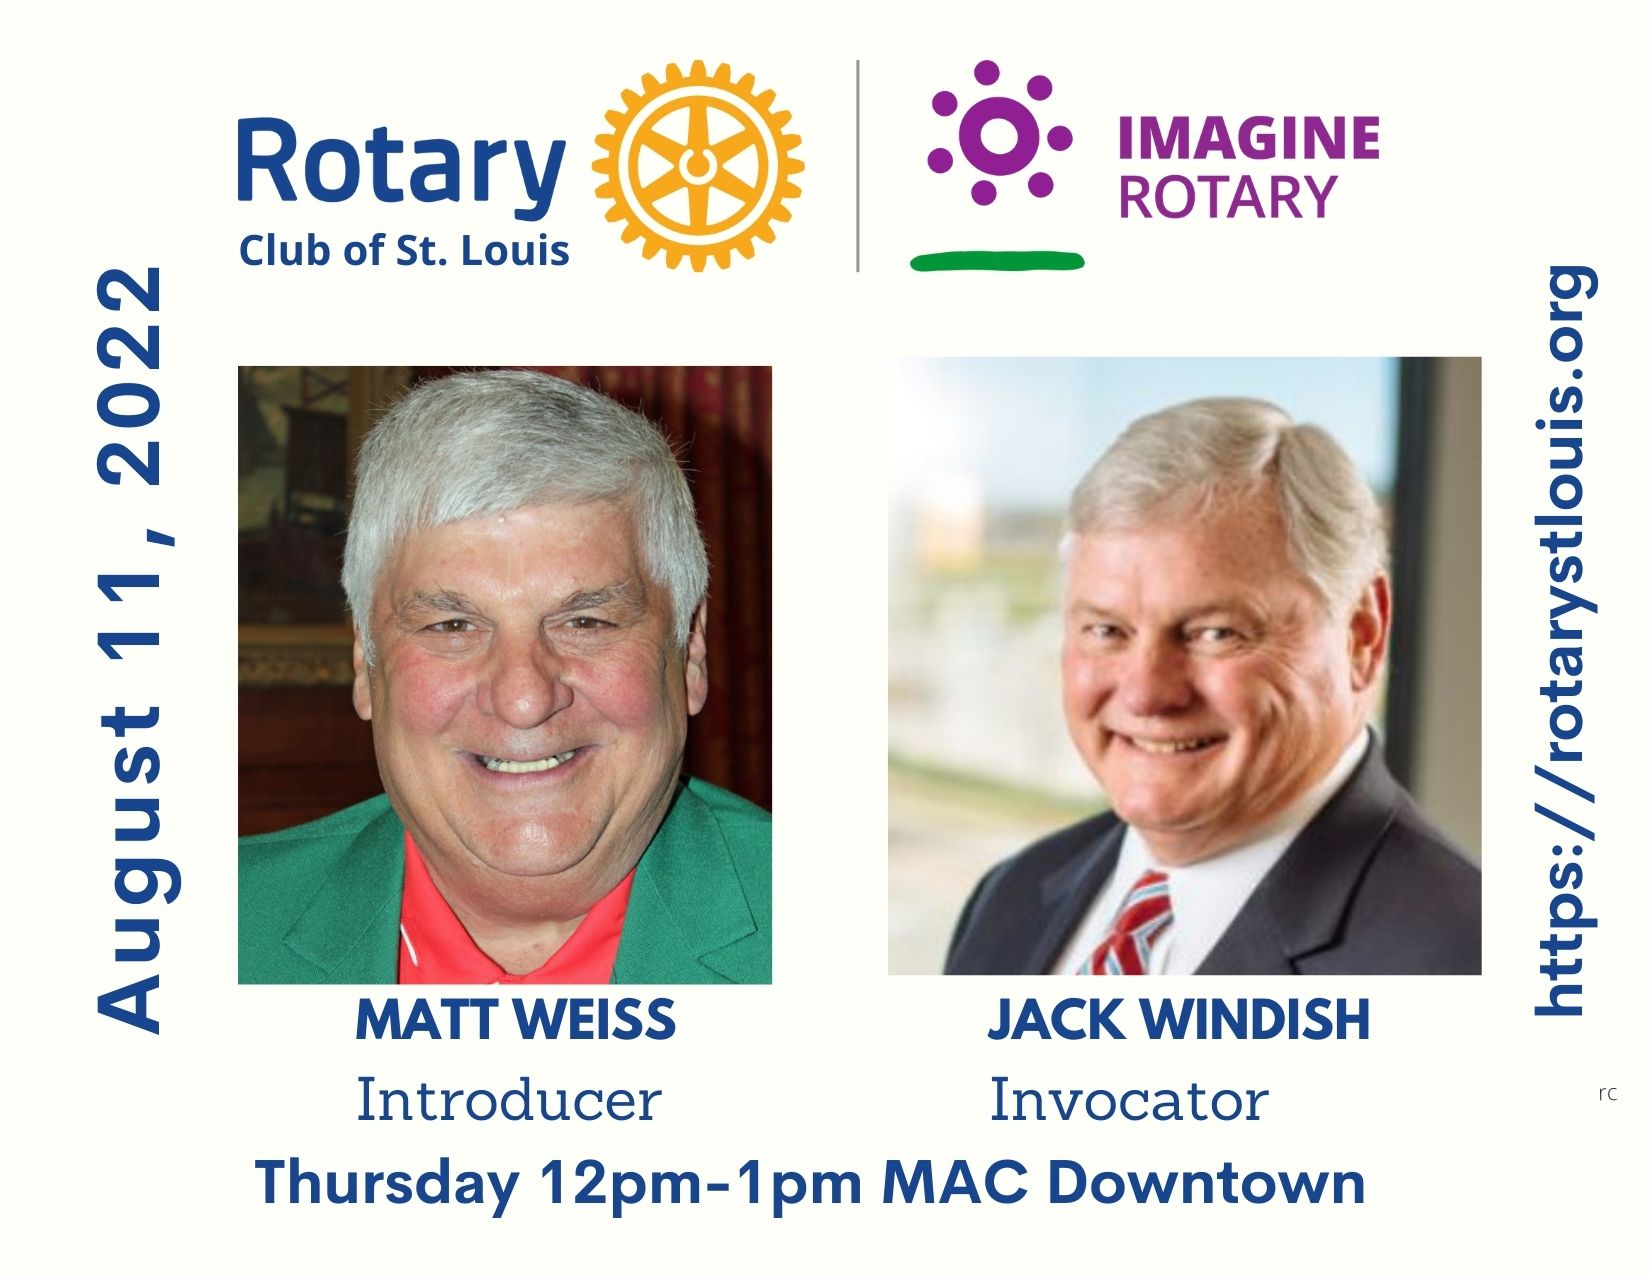 Matt Weiss, Introducer & Jack Windish, Invocator 8-11-22 at St. Louis Rotary